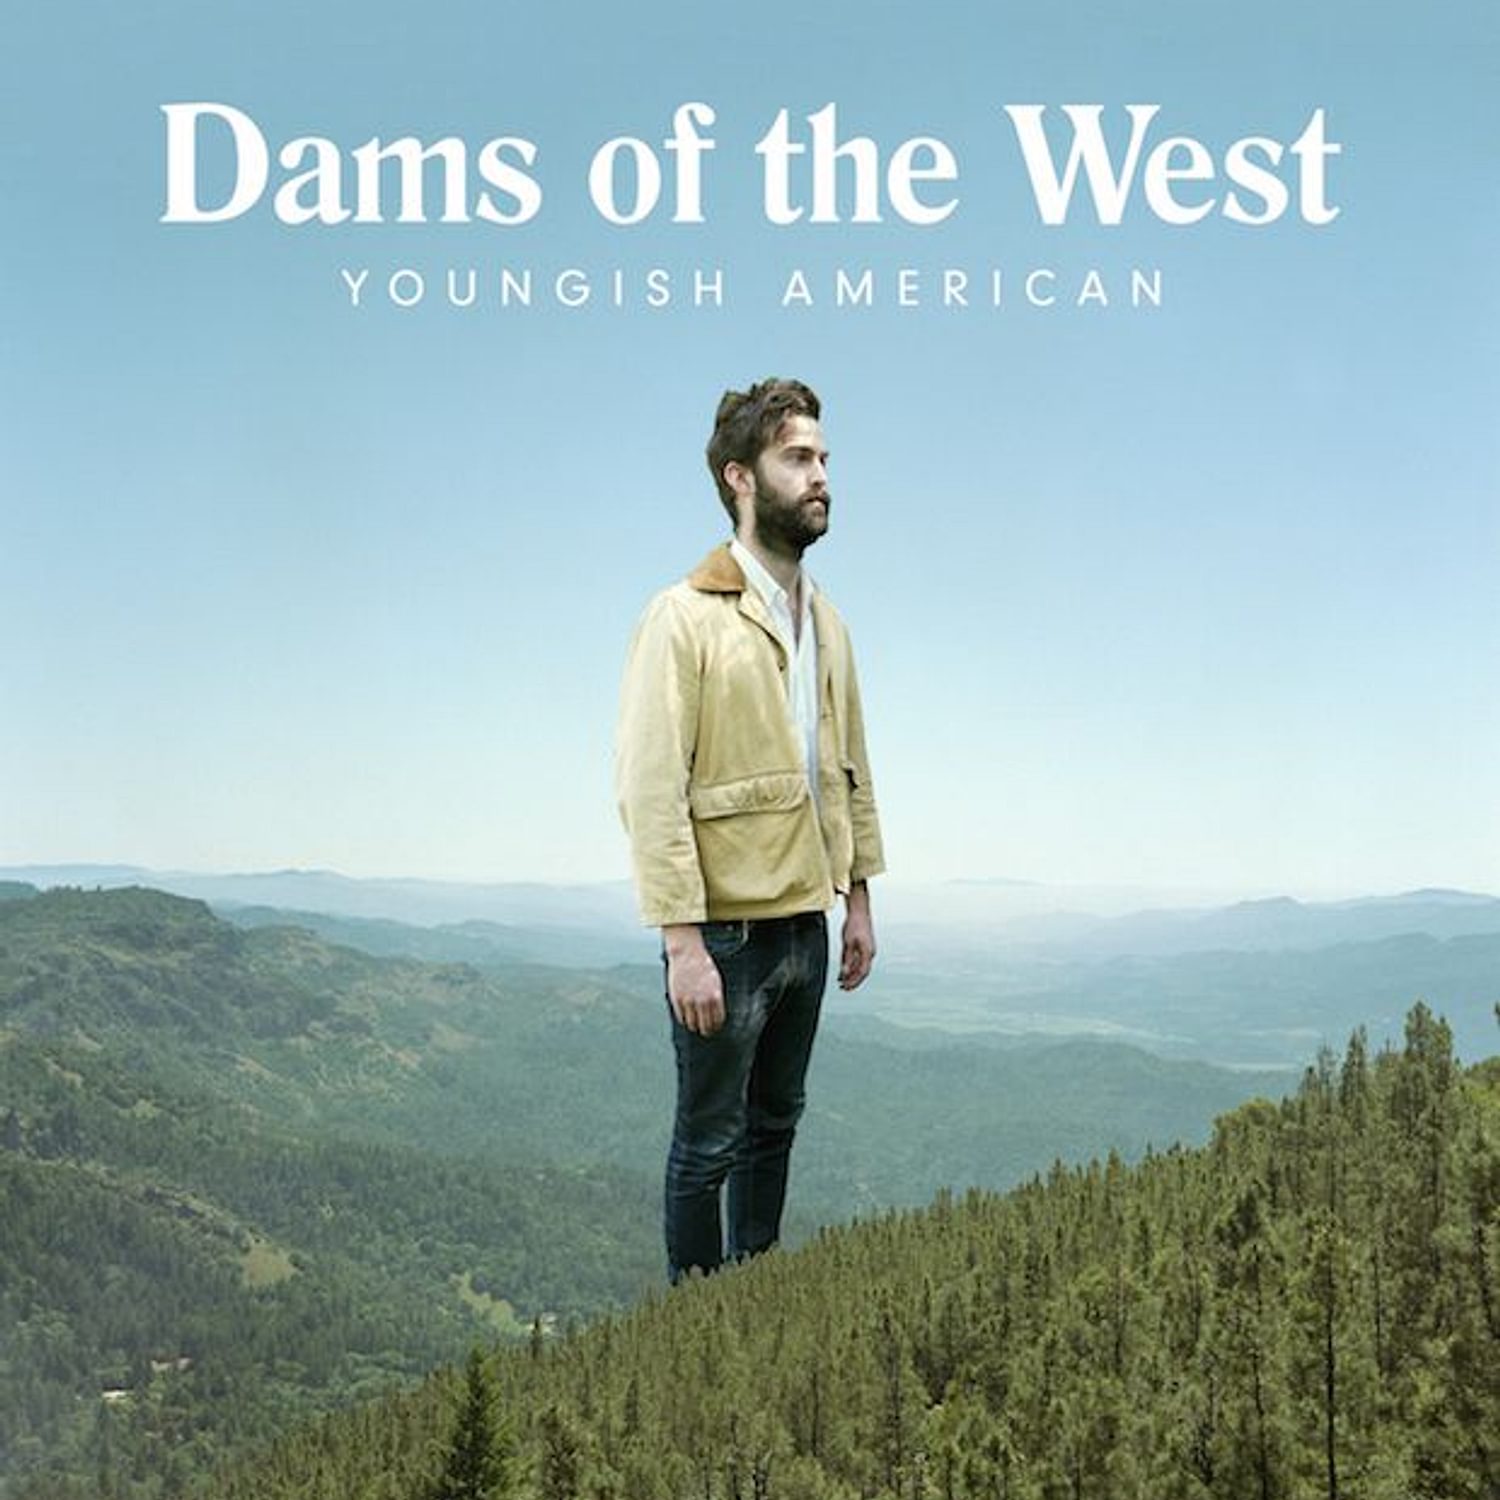 Dams of the West - Youngish American